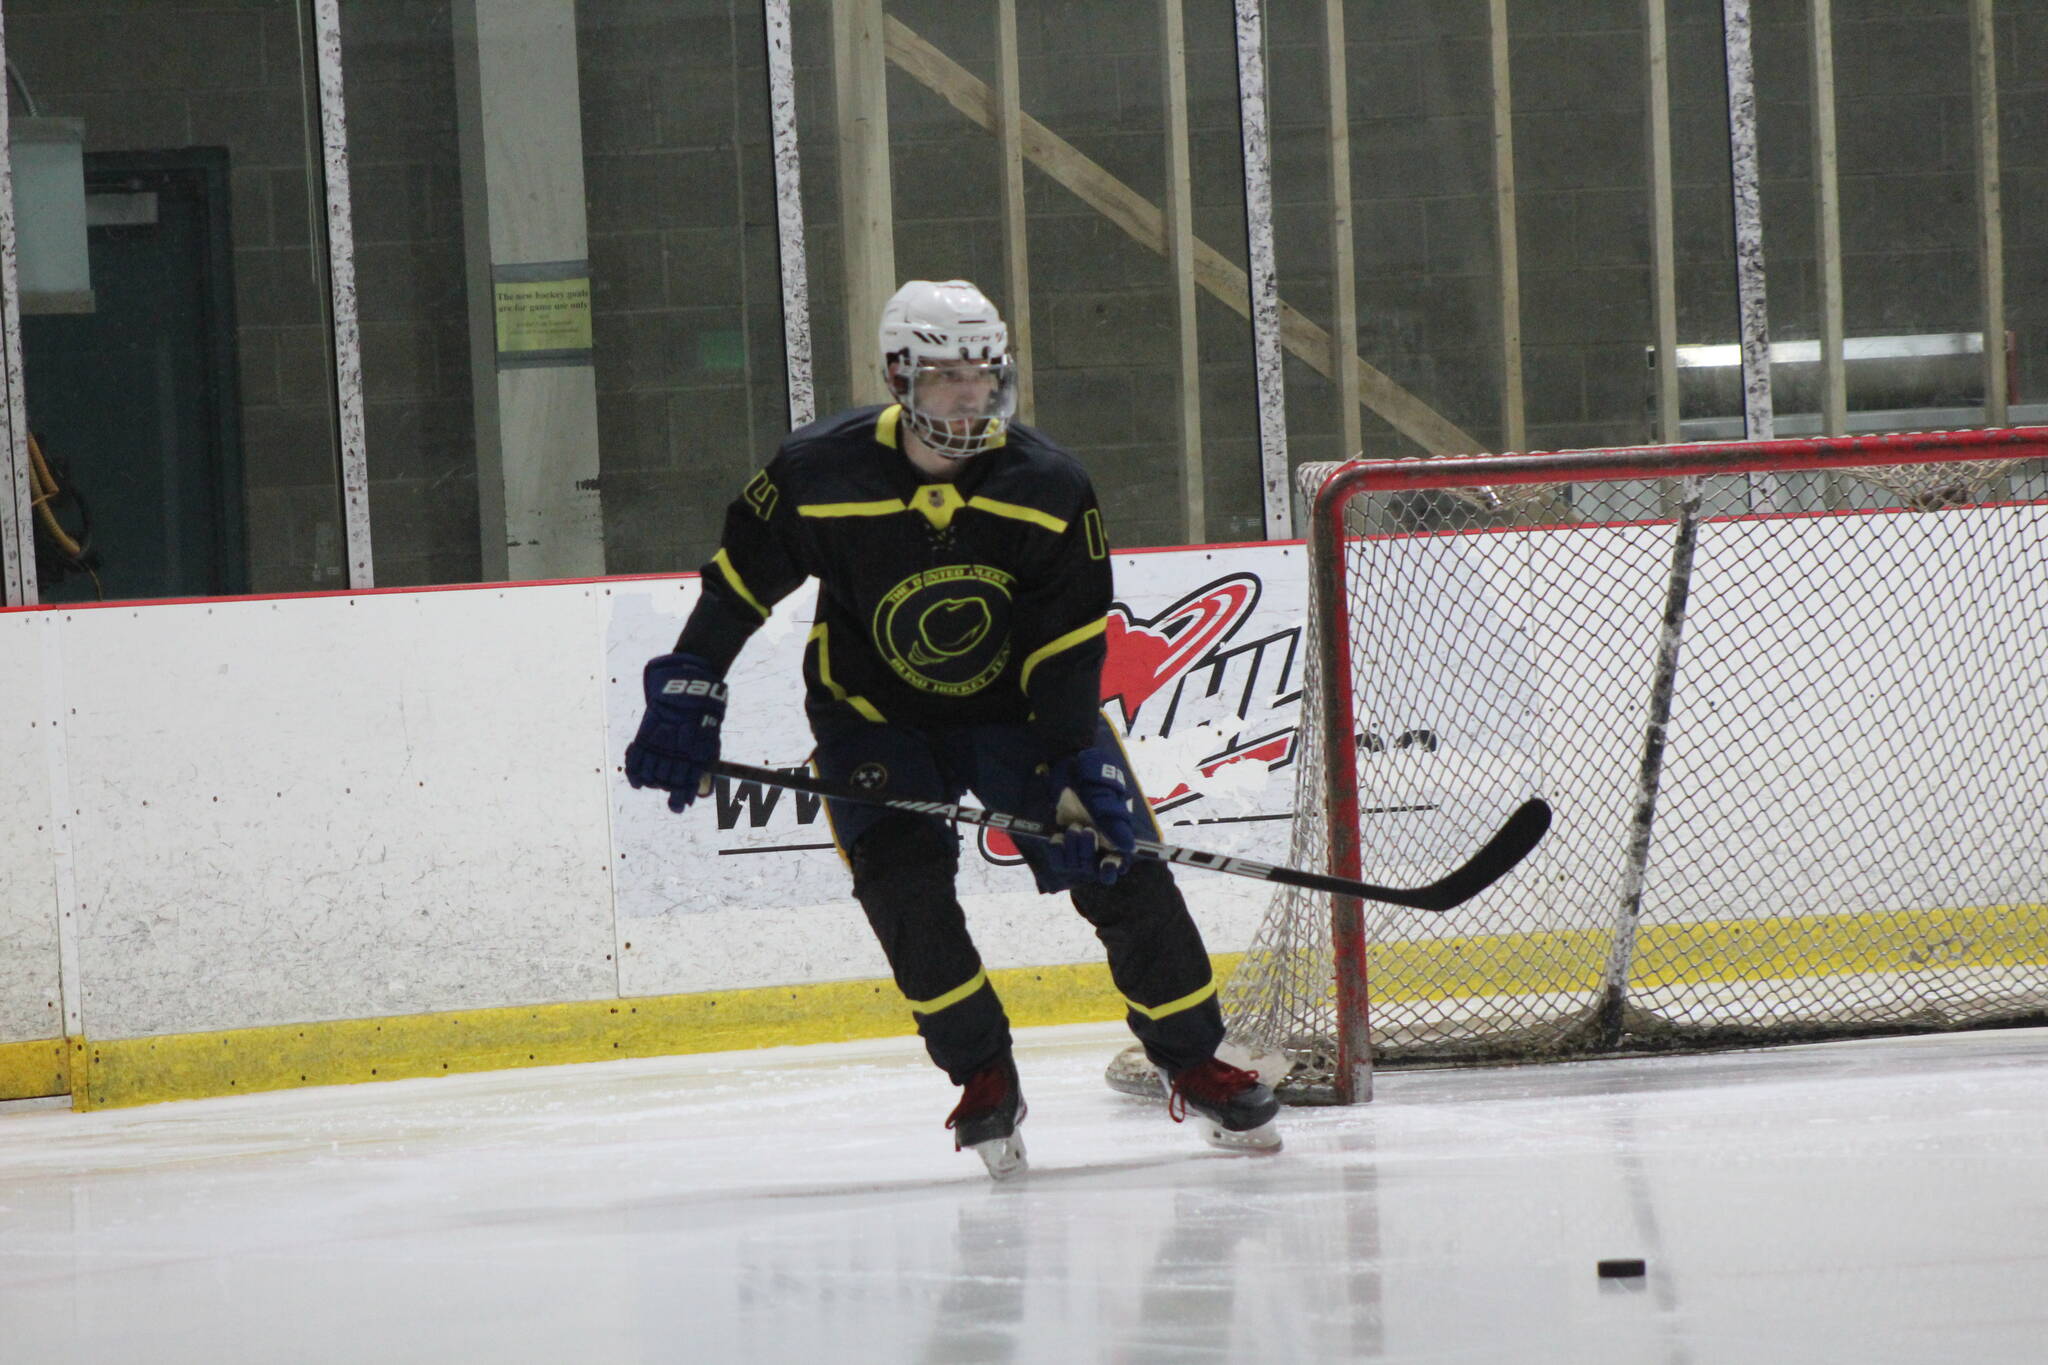 Adam Young has been invited to the U.S. Blind Hockey training camp, but is relying on donations to fund his upcoming trip. Photo by Bailey Jo Josie/Sound Publishing.